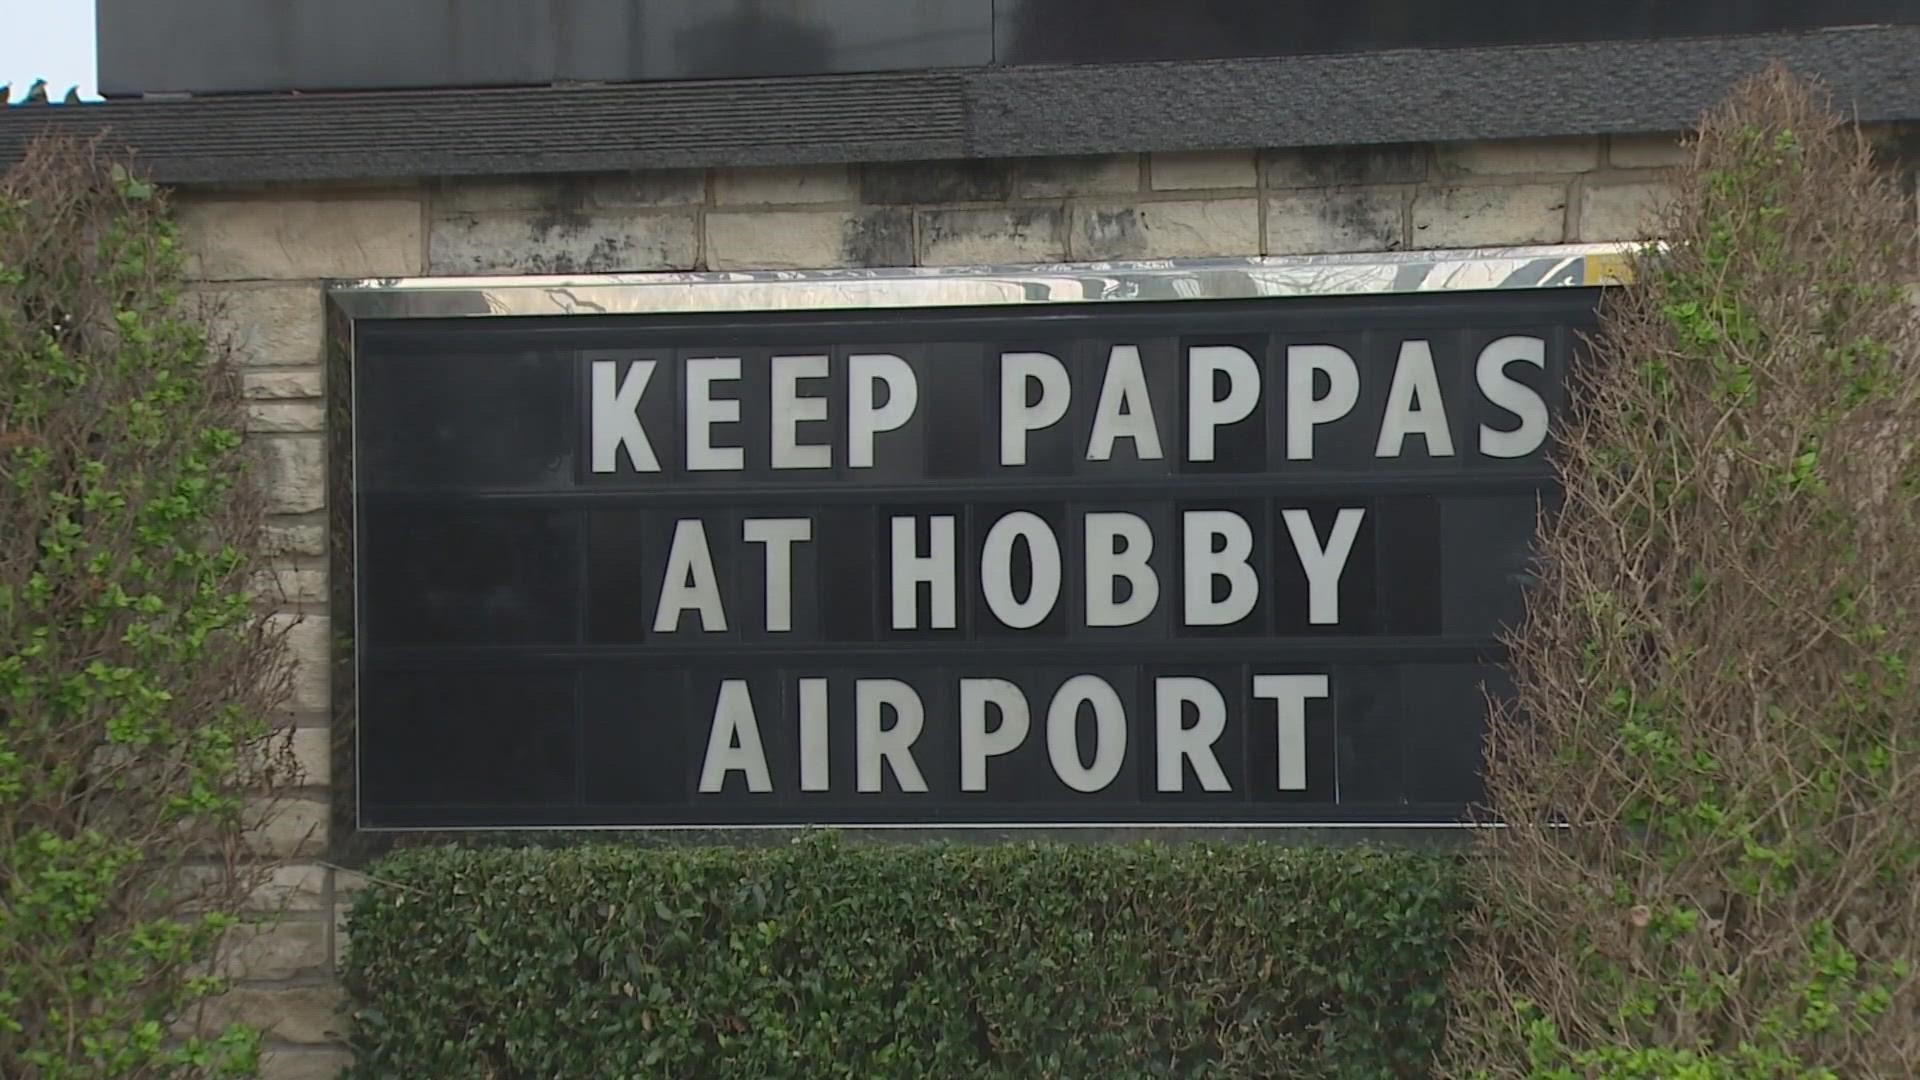 Pappas restaurants could soon be departing Hobby Airport because the City of Houston is considering awarding the food contract to another company.